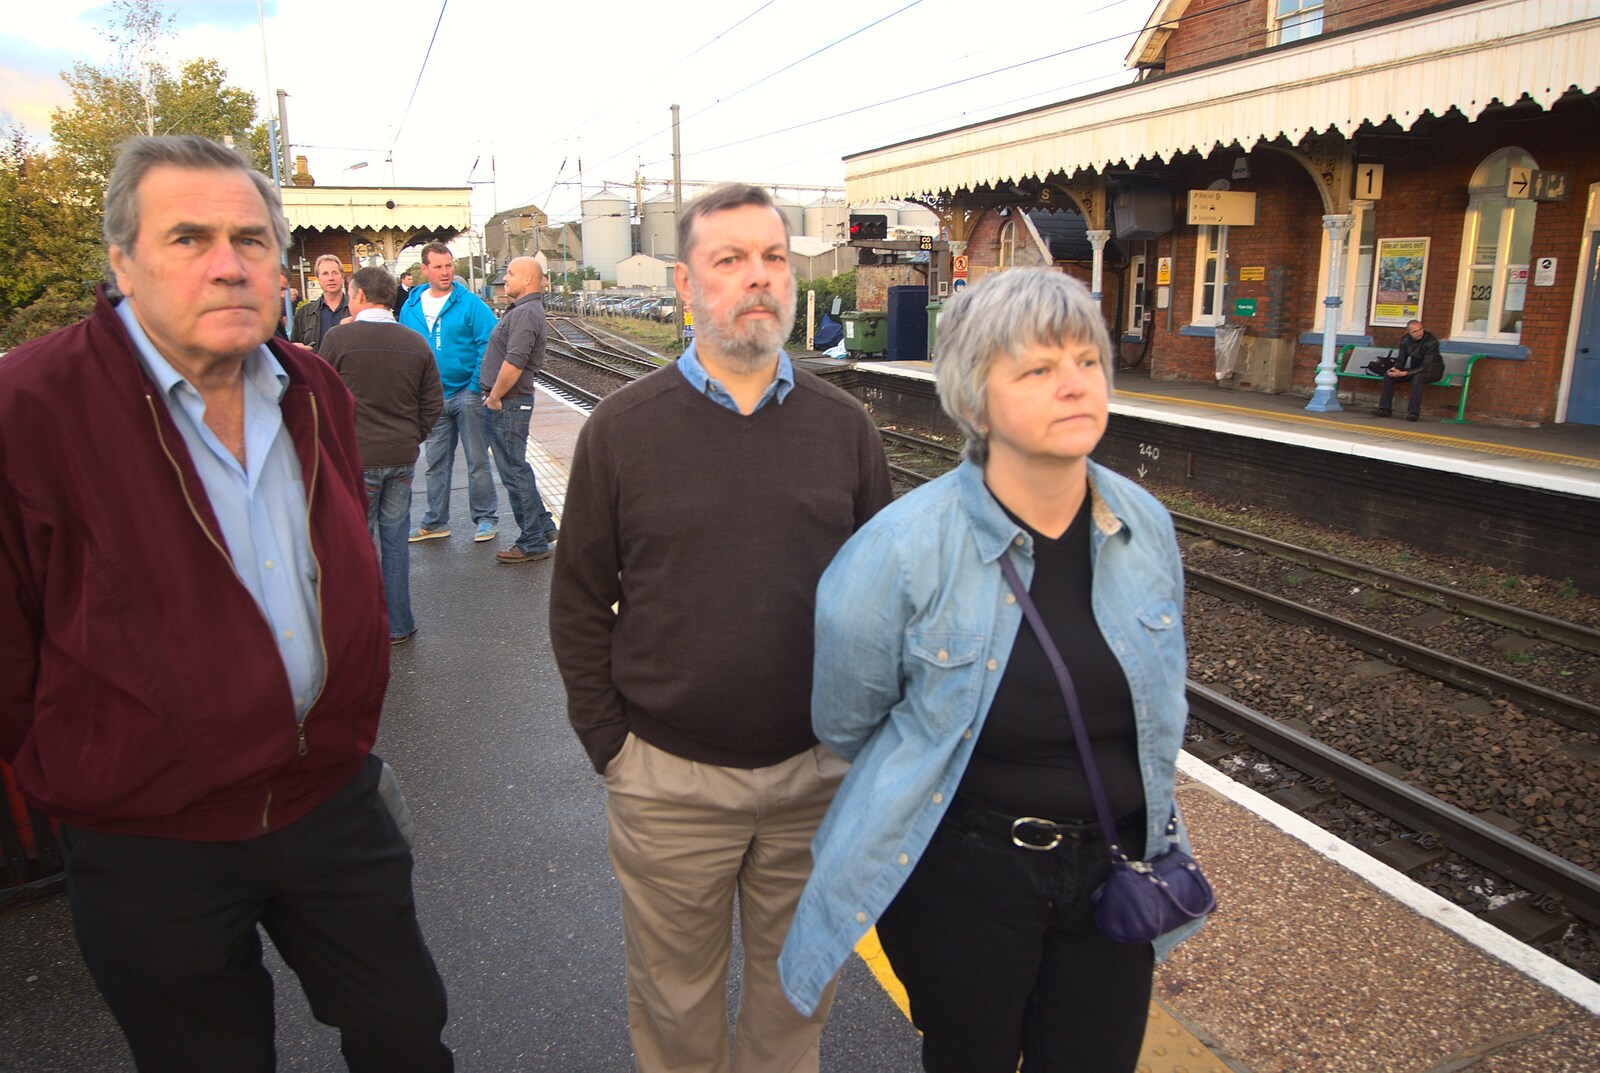 Alan, Benny and Gloria wait for the train from The CAMRA Norwich Beer Festival, St. Andrew's Hall, Norwich - 26th October 2011